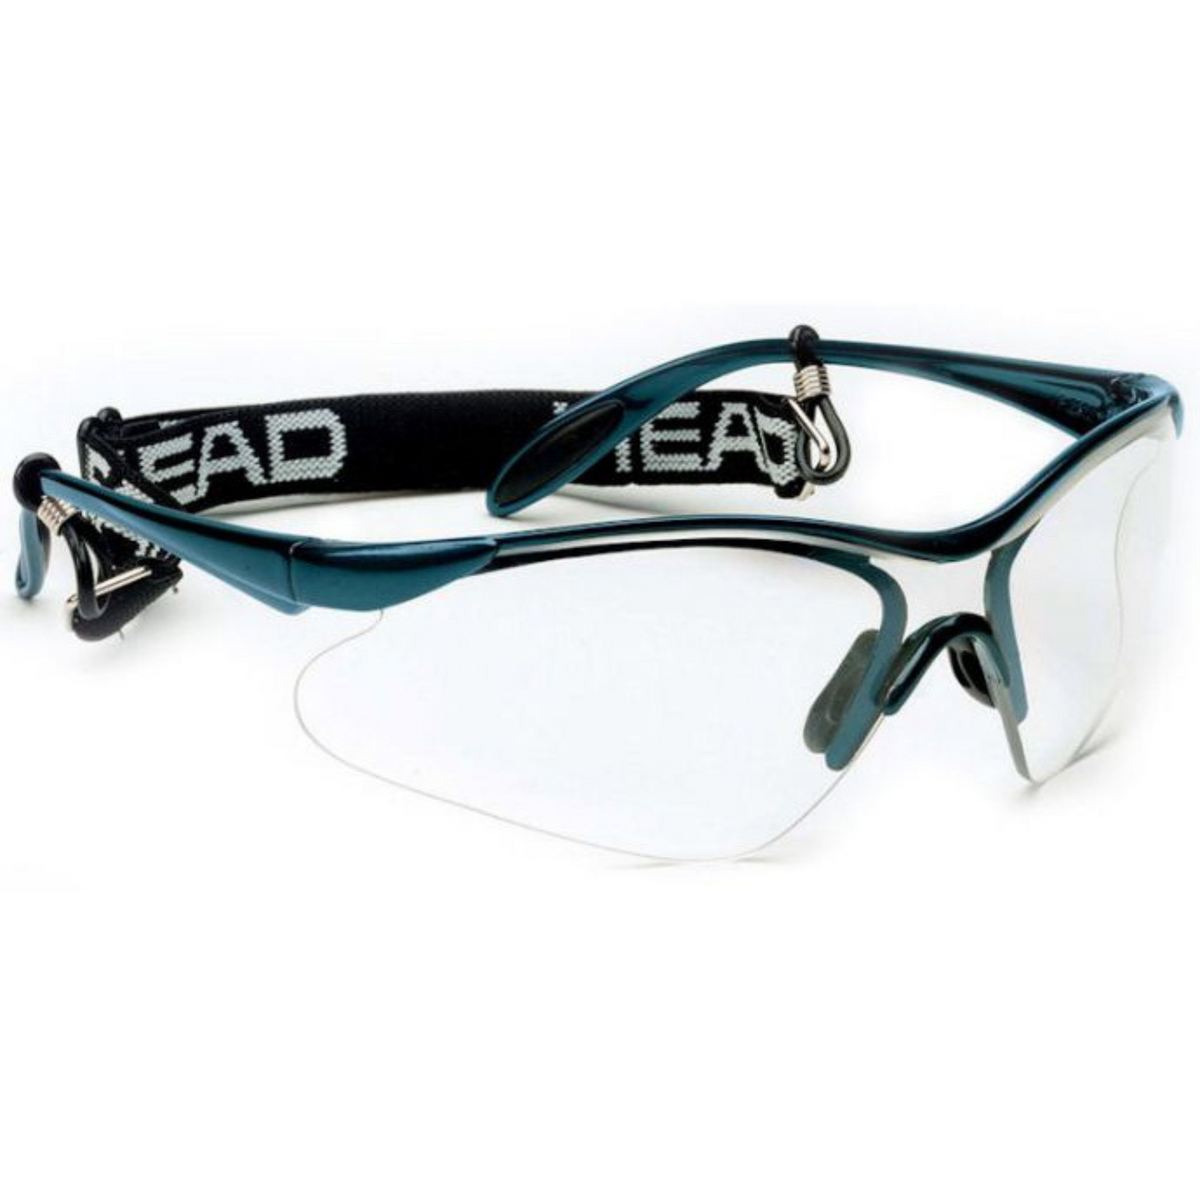 Rave goggles from head for racquet sports